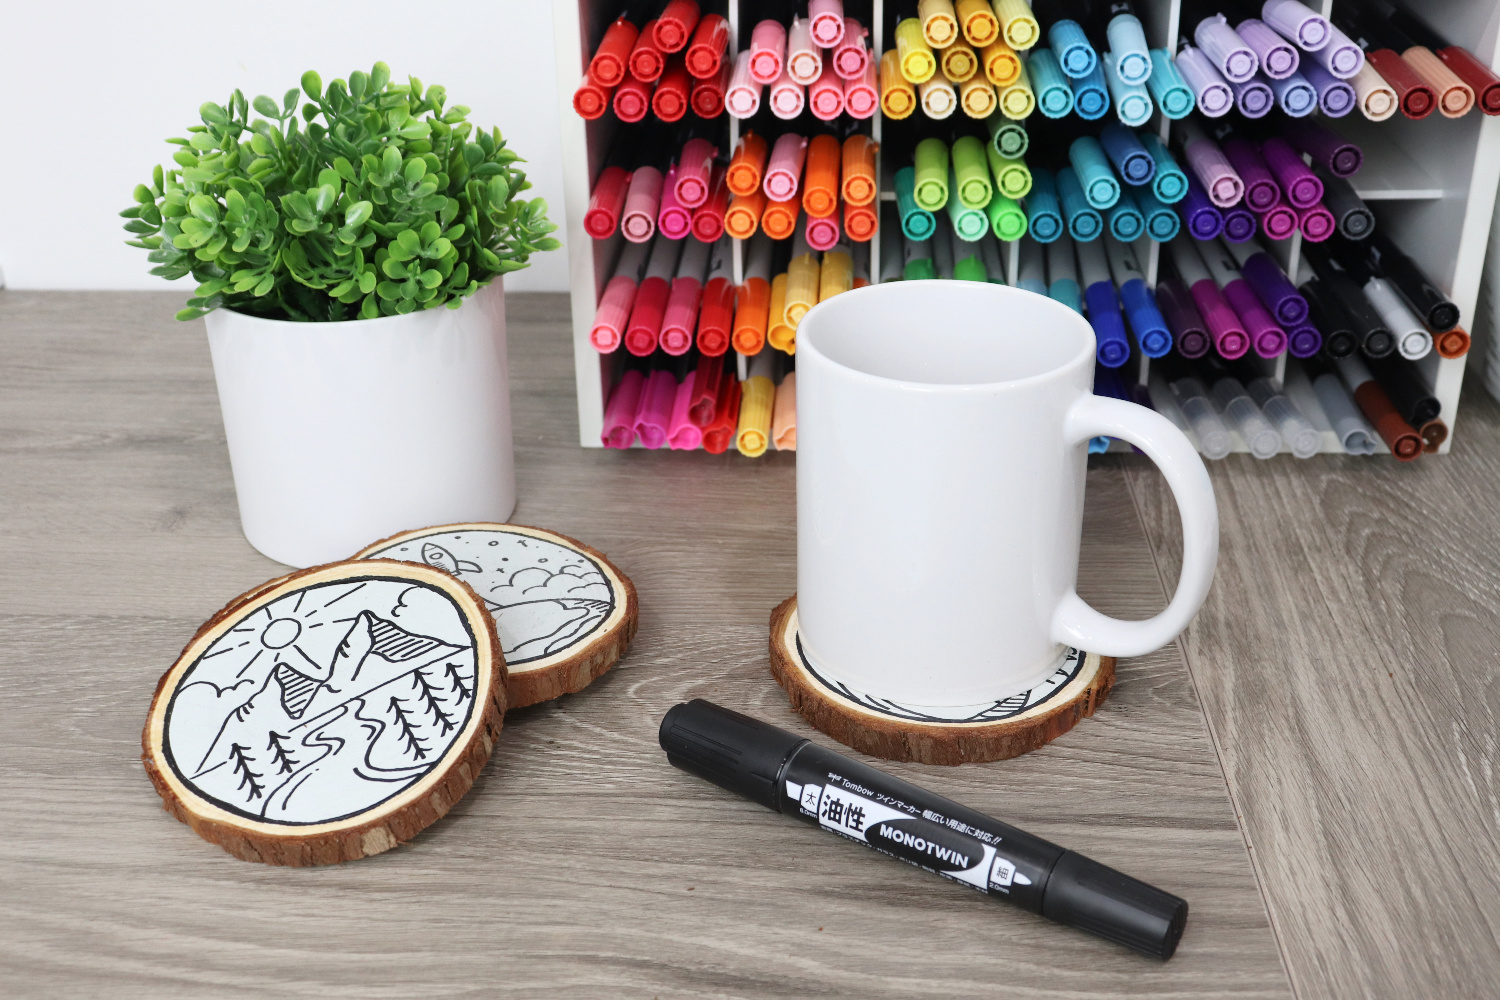 Image contains a wooden desktop with a colorful marker organizer and a faux plant, as well as a white coffee cup on a wood slice coaster. Two other monoline travel coasters sit by the plant, as does a MONOTwin bold marker.